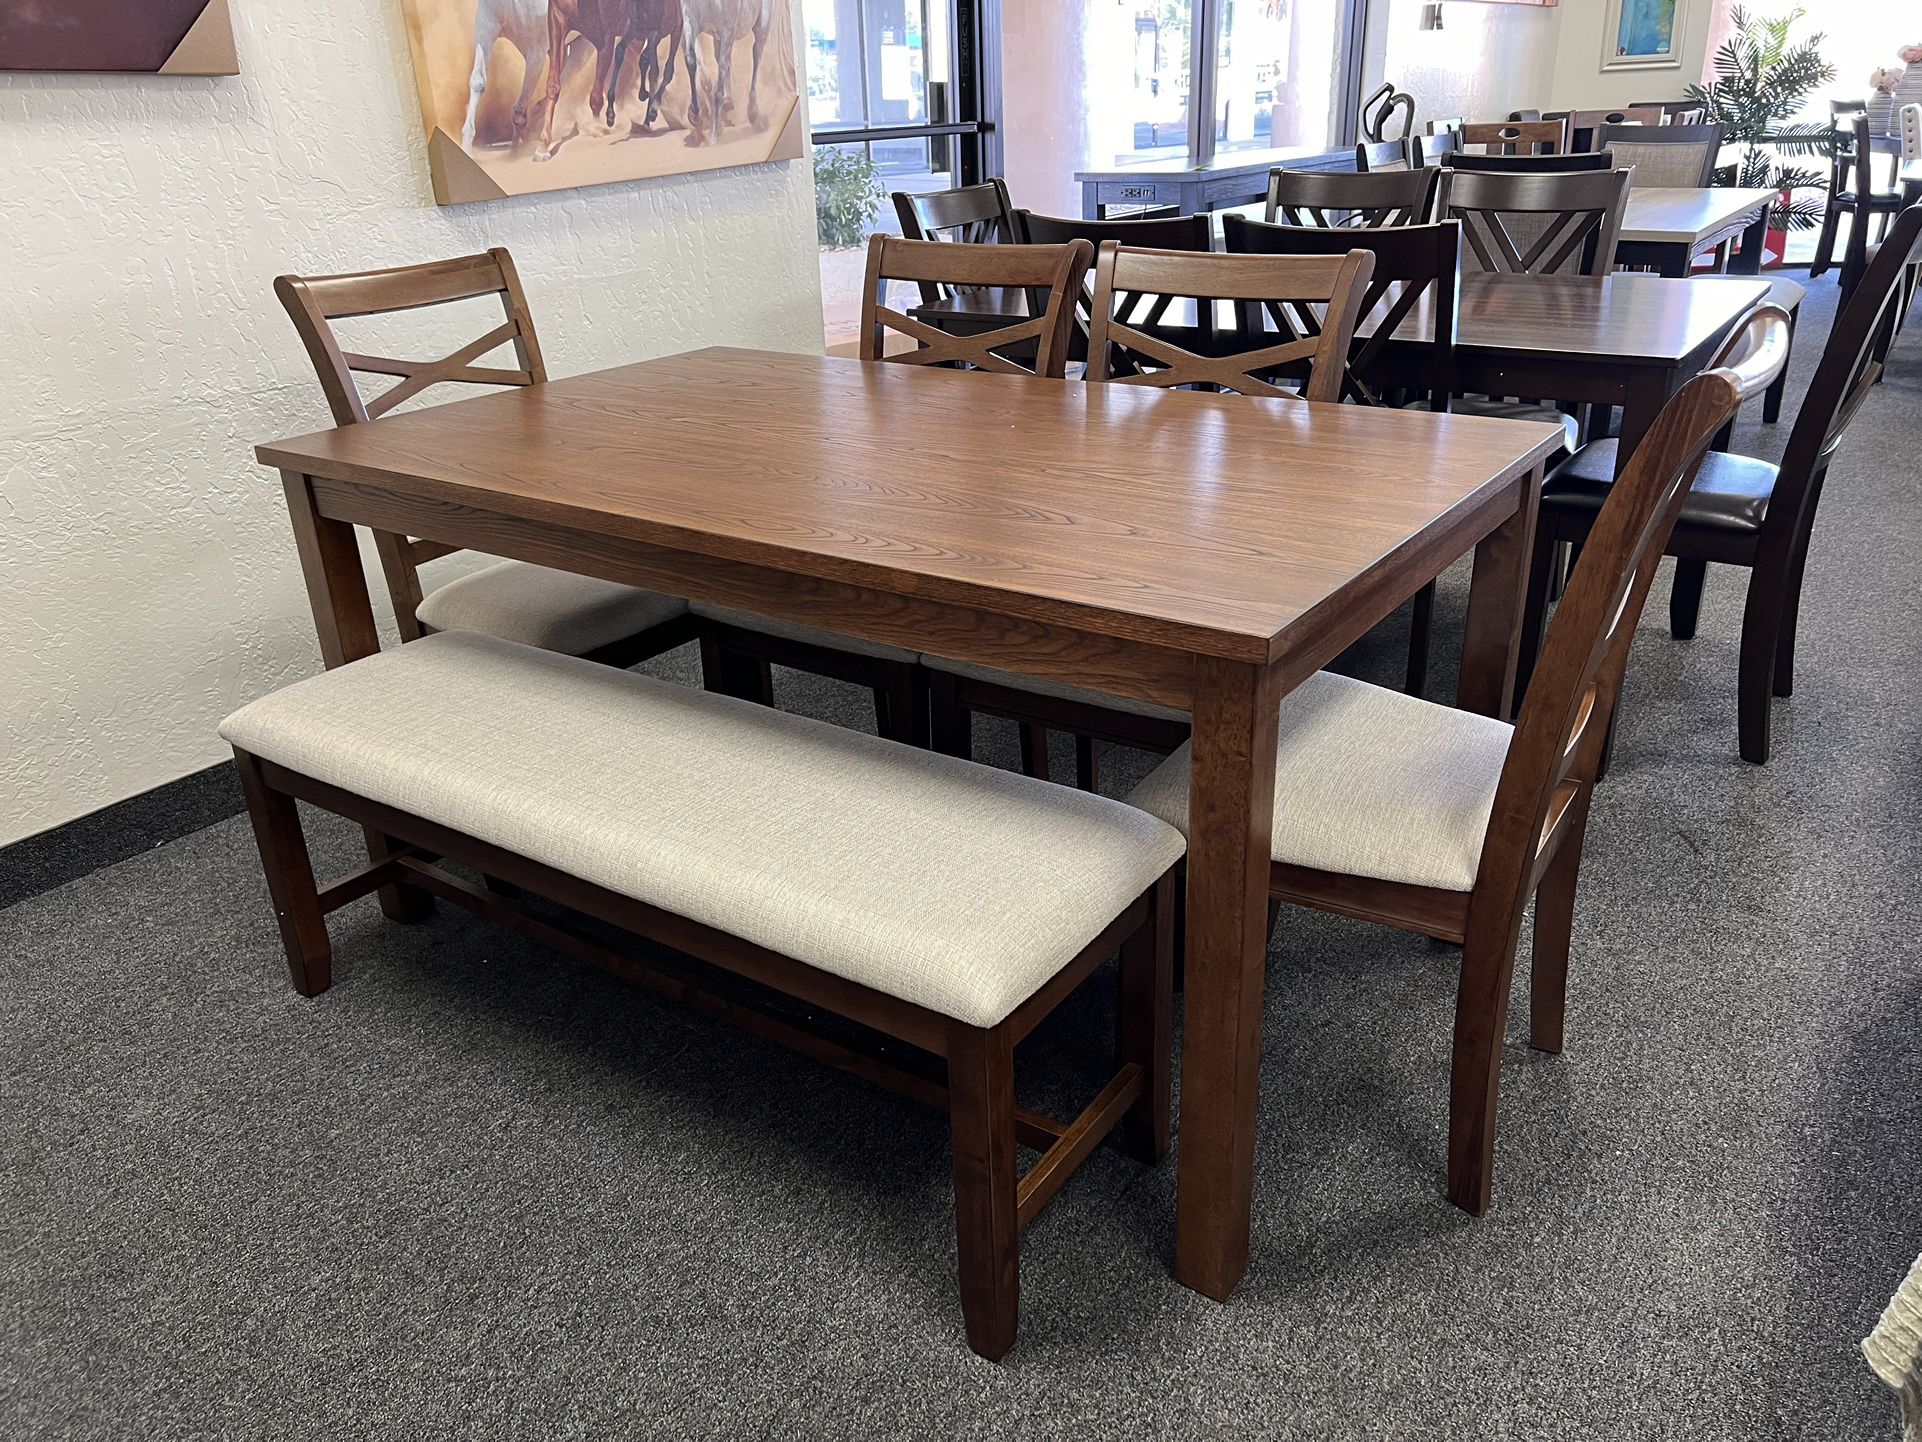 Wooden Dining Set With 4 Chairs And Bench 